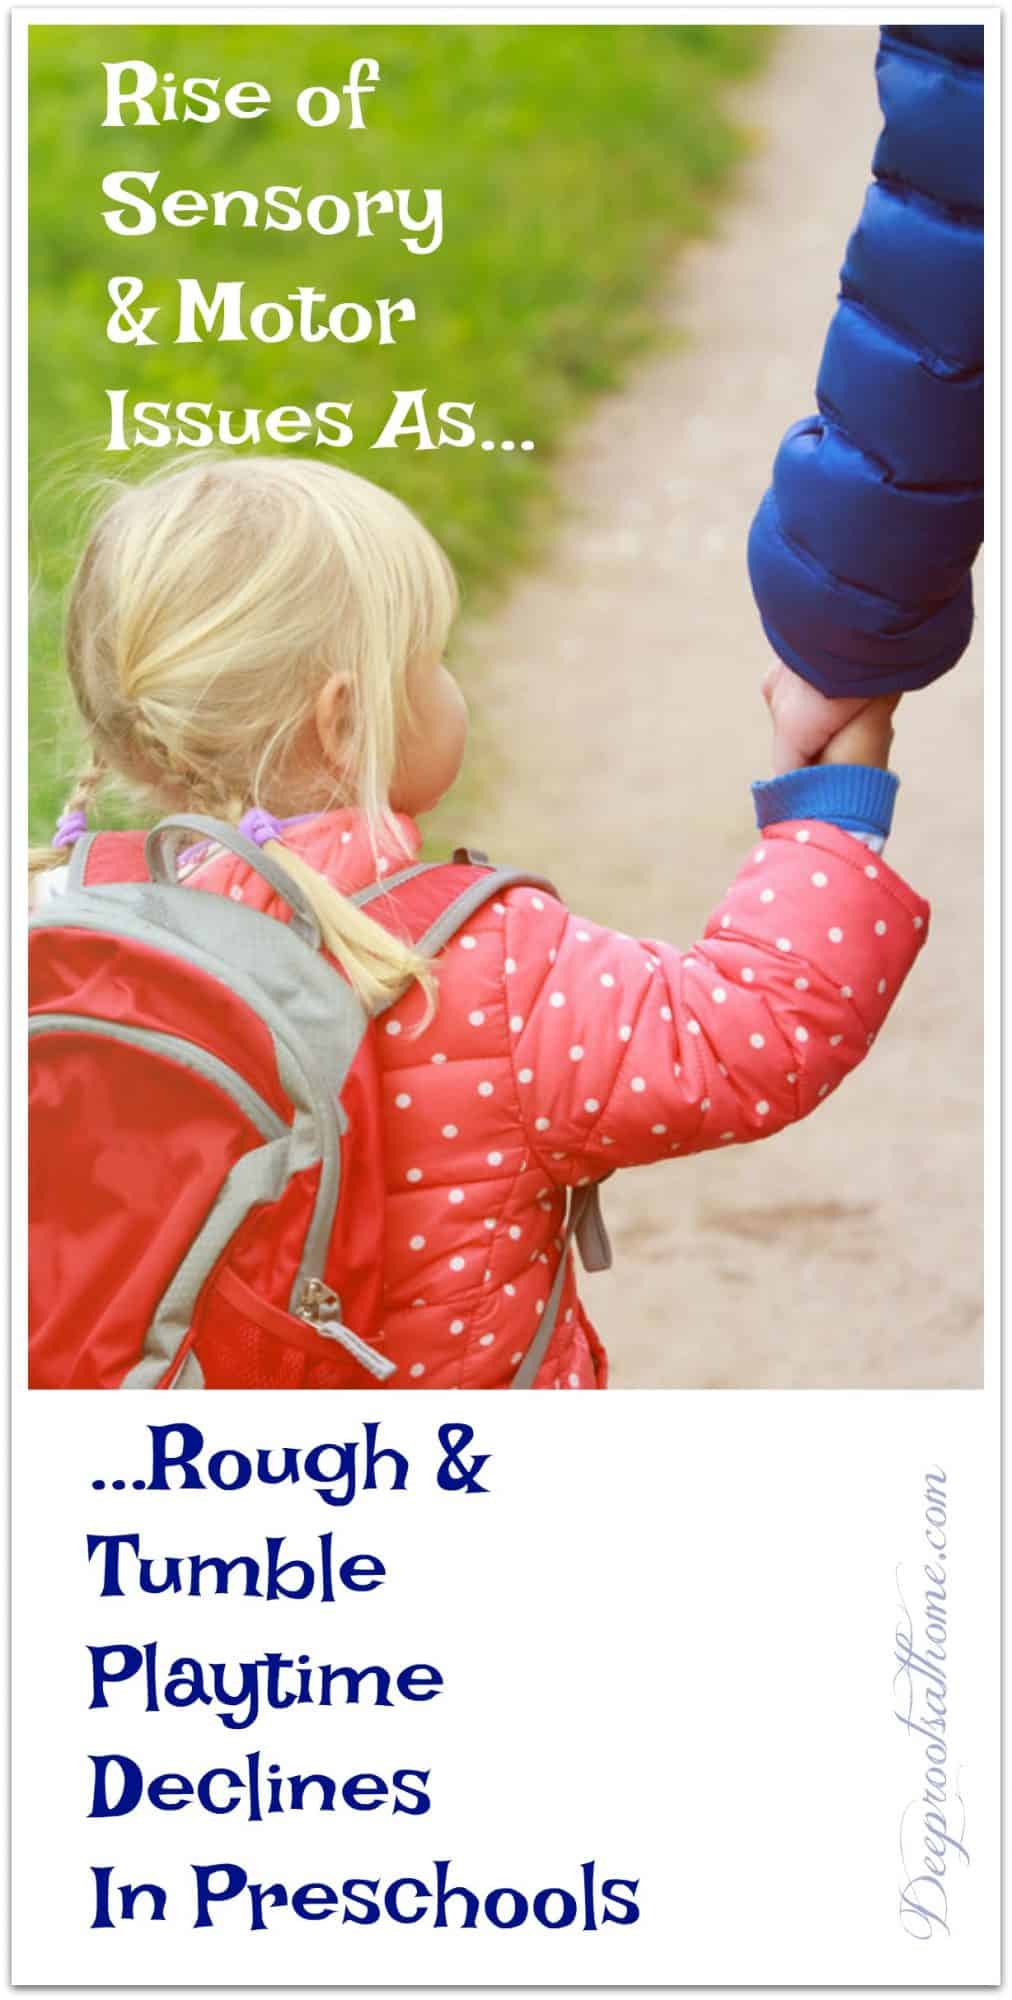 Rise of Sensory/Motor Issues as Rough/Tumble Play in Preschool Declines. Child being led off to school by parent